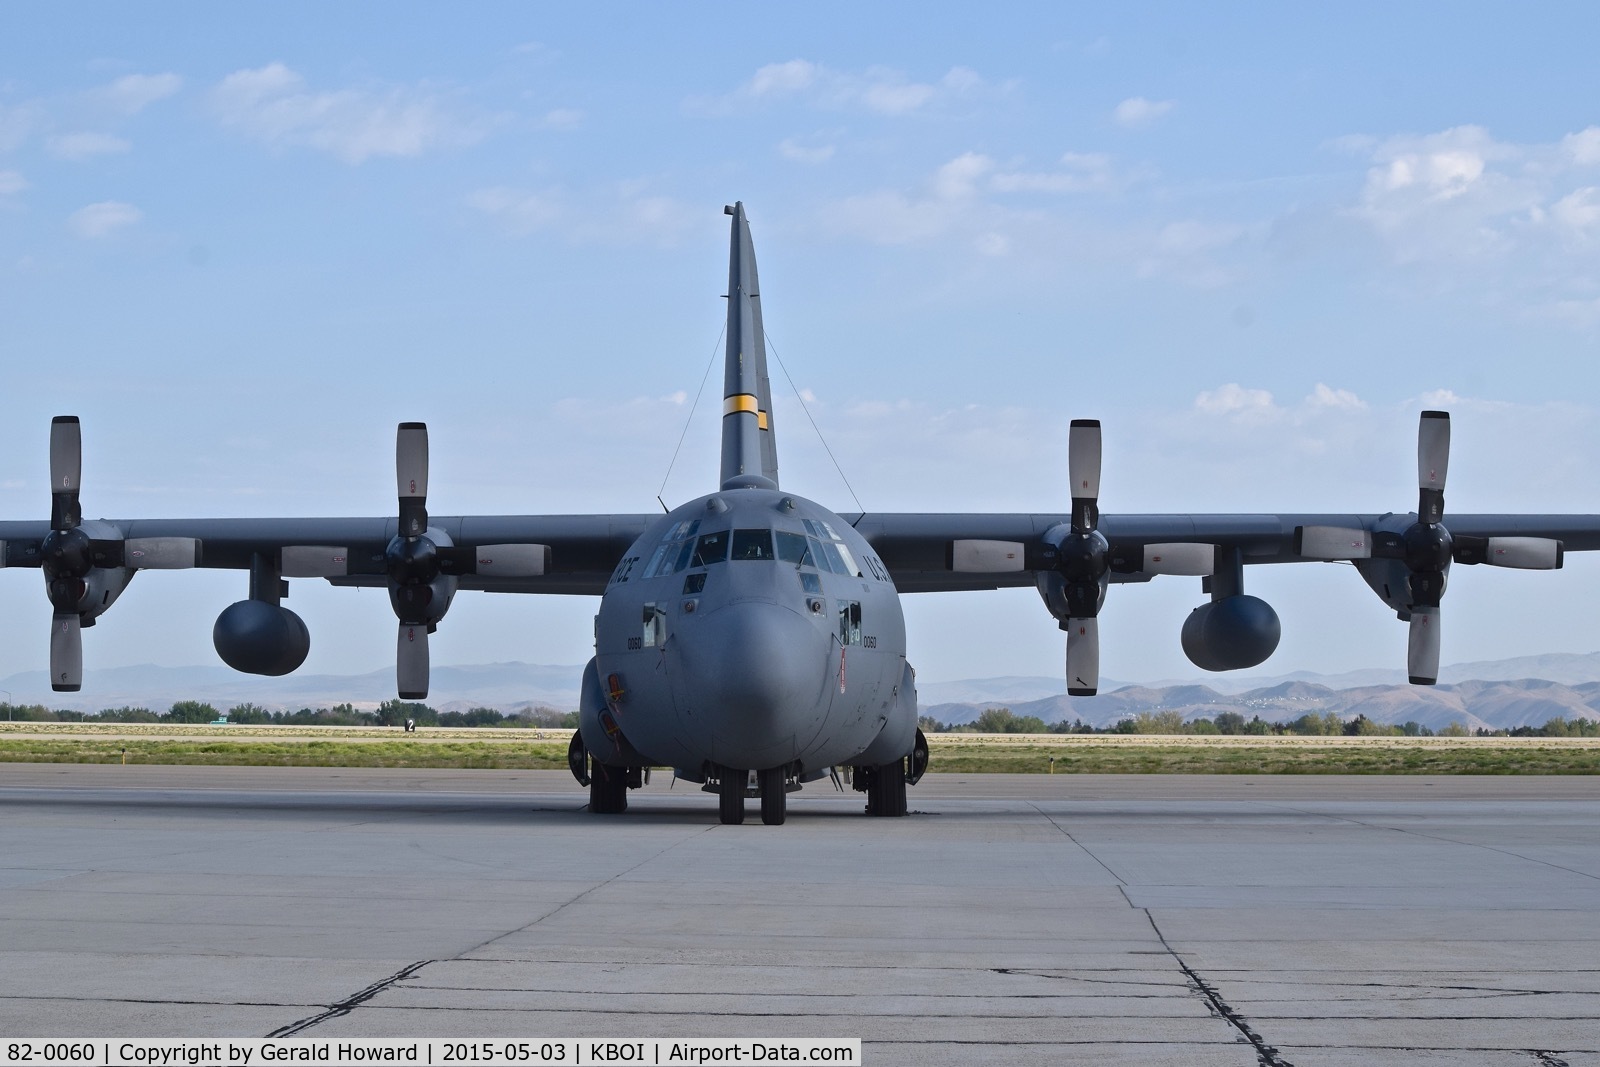 82-0060, 1982 Lockheed C-130H-LM Hercules C/N 382-4979, 144th Airlift Sq., AK ANG divested from ANG on 3-5-17.